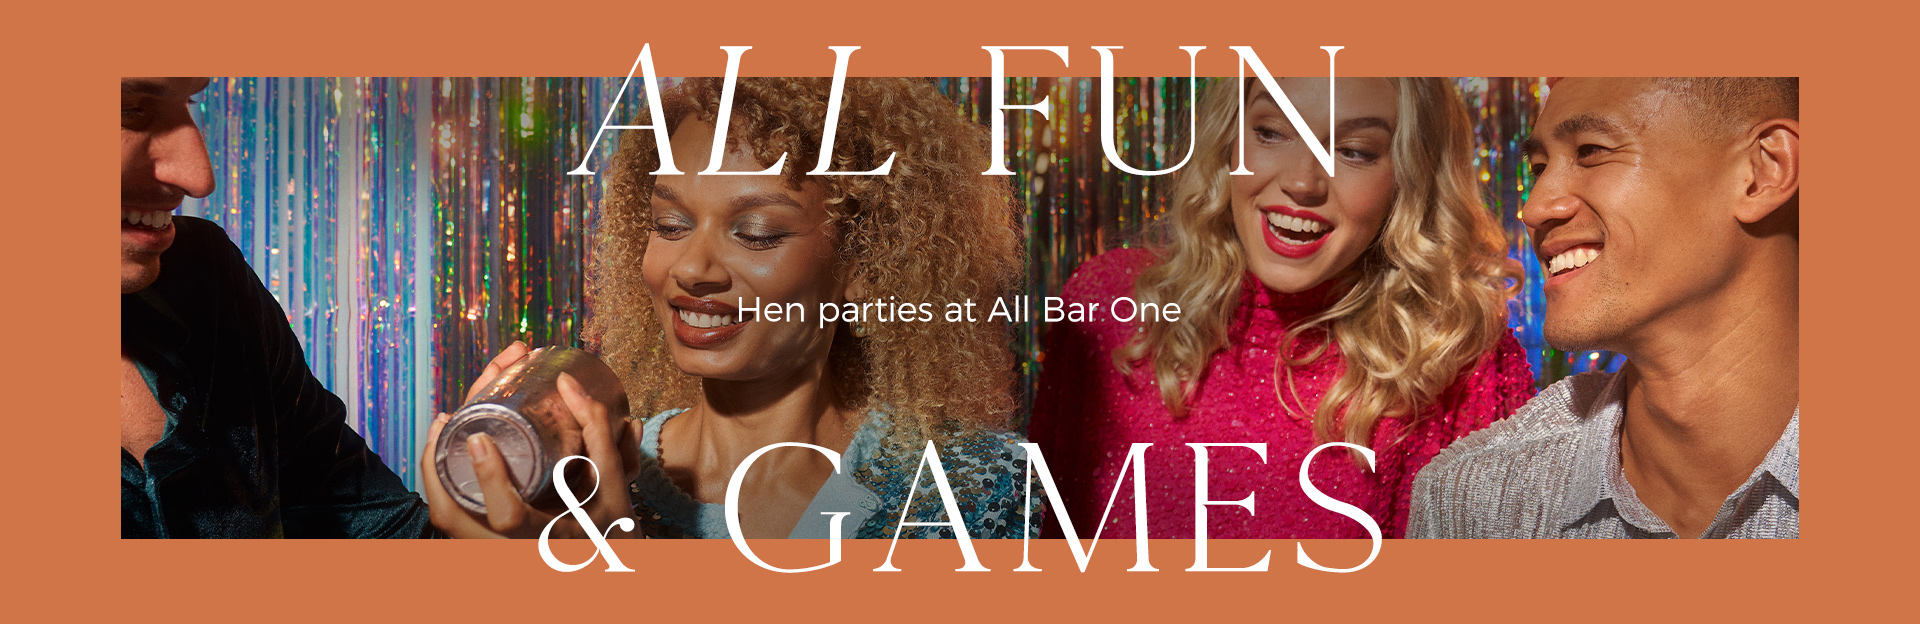 Hen parties at All Bar One Worcester